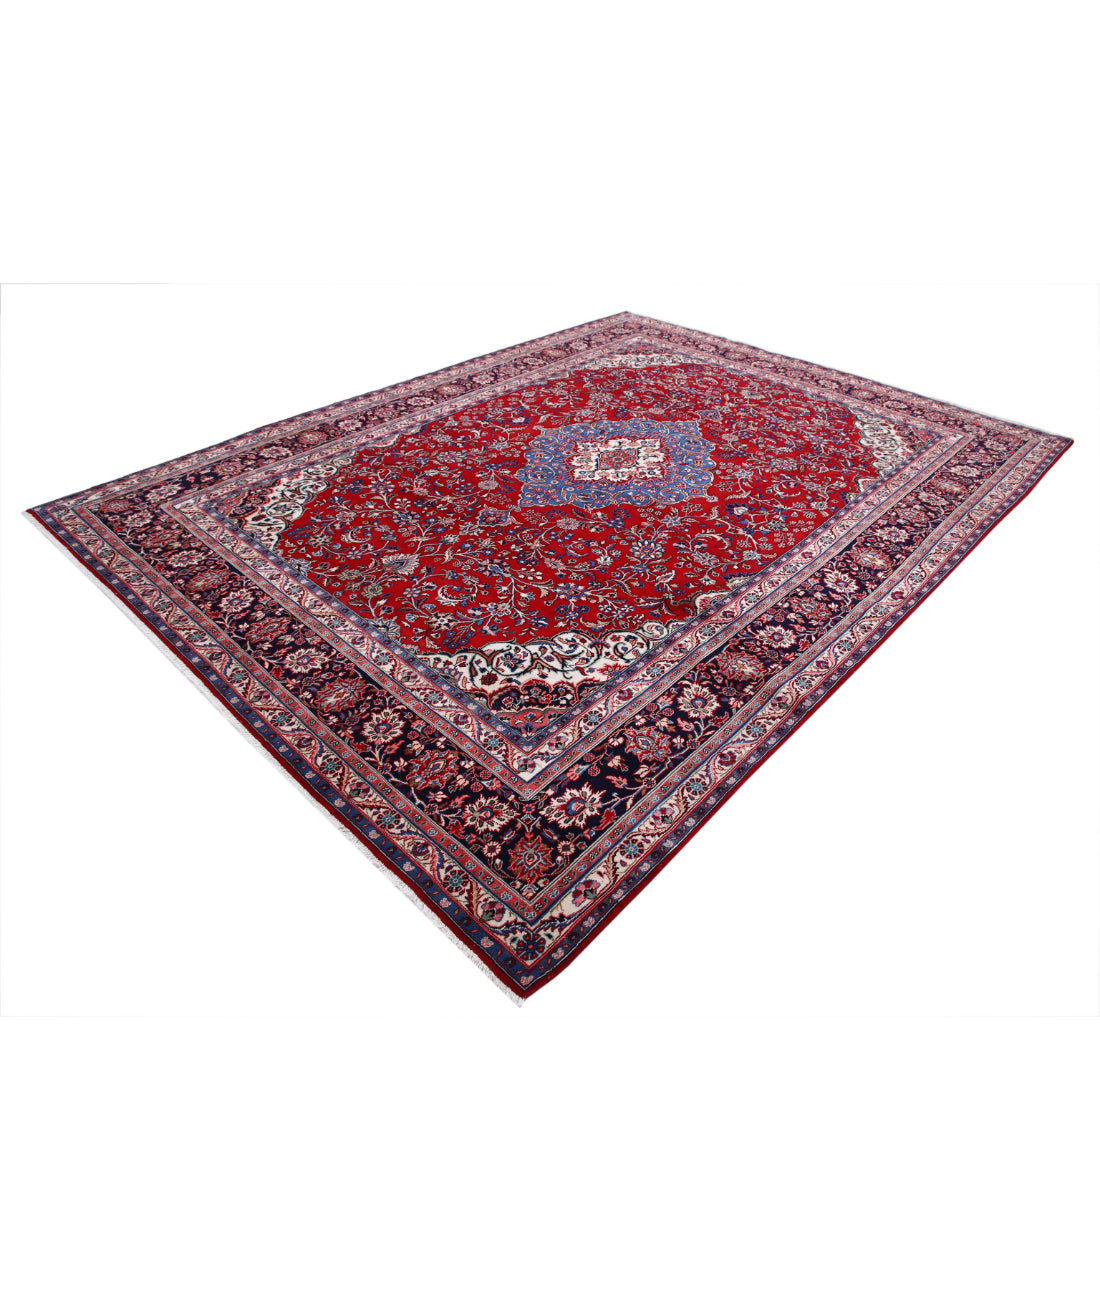 Hand Knotted Persian Tabriz Wool Rug - 8'8'' x 11'8'' 8'8'' x 11'8'' (260 X 350) / Red / Blue